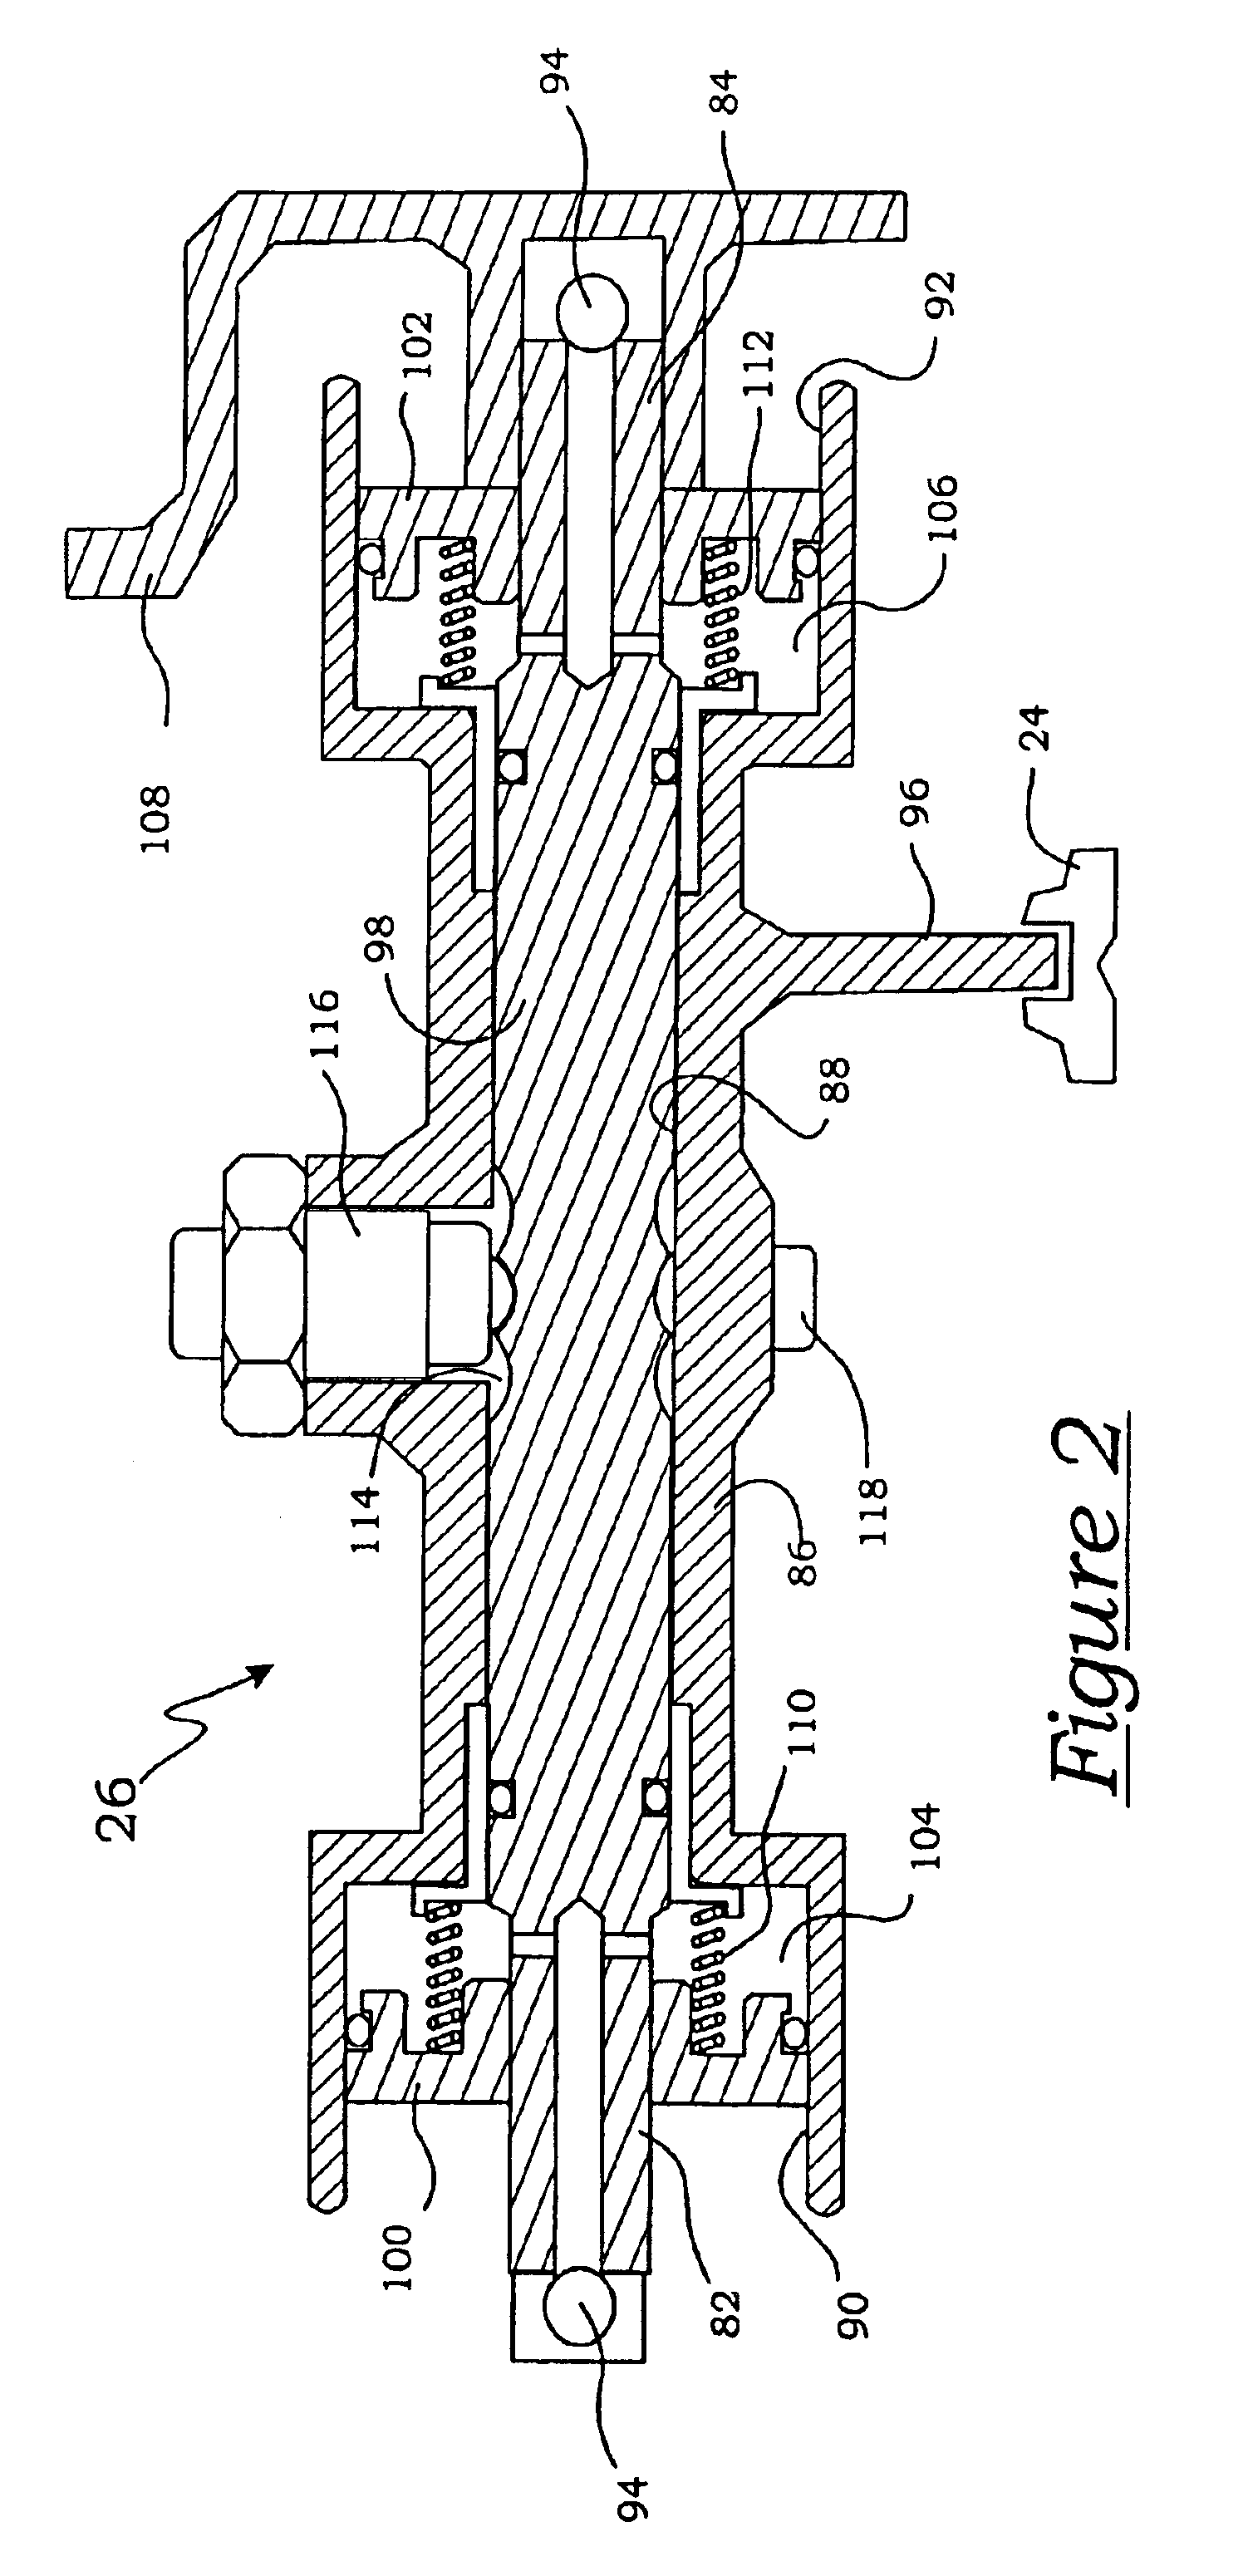 Method for controlling the positioning of the synchronizers of a dual clutch transmission